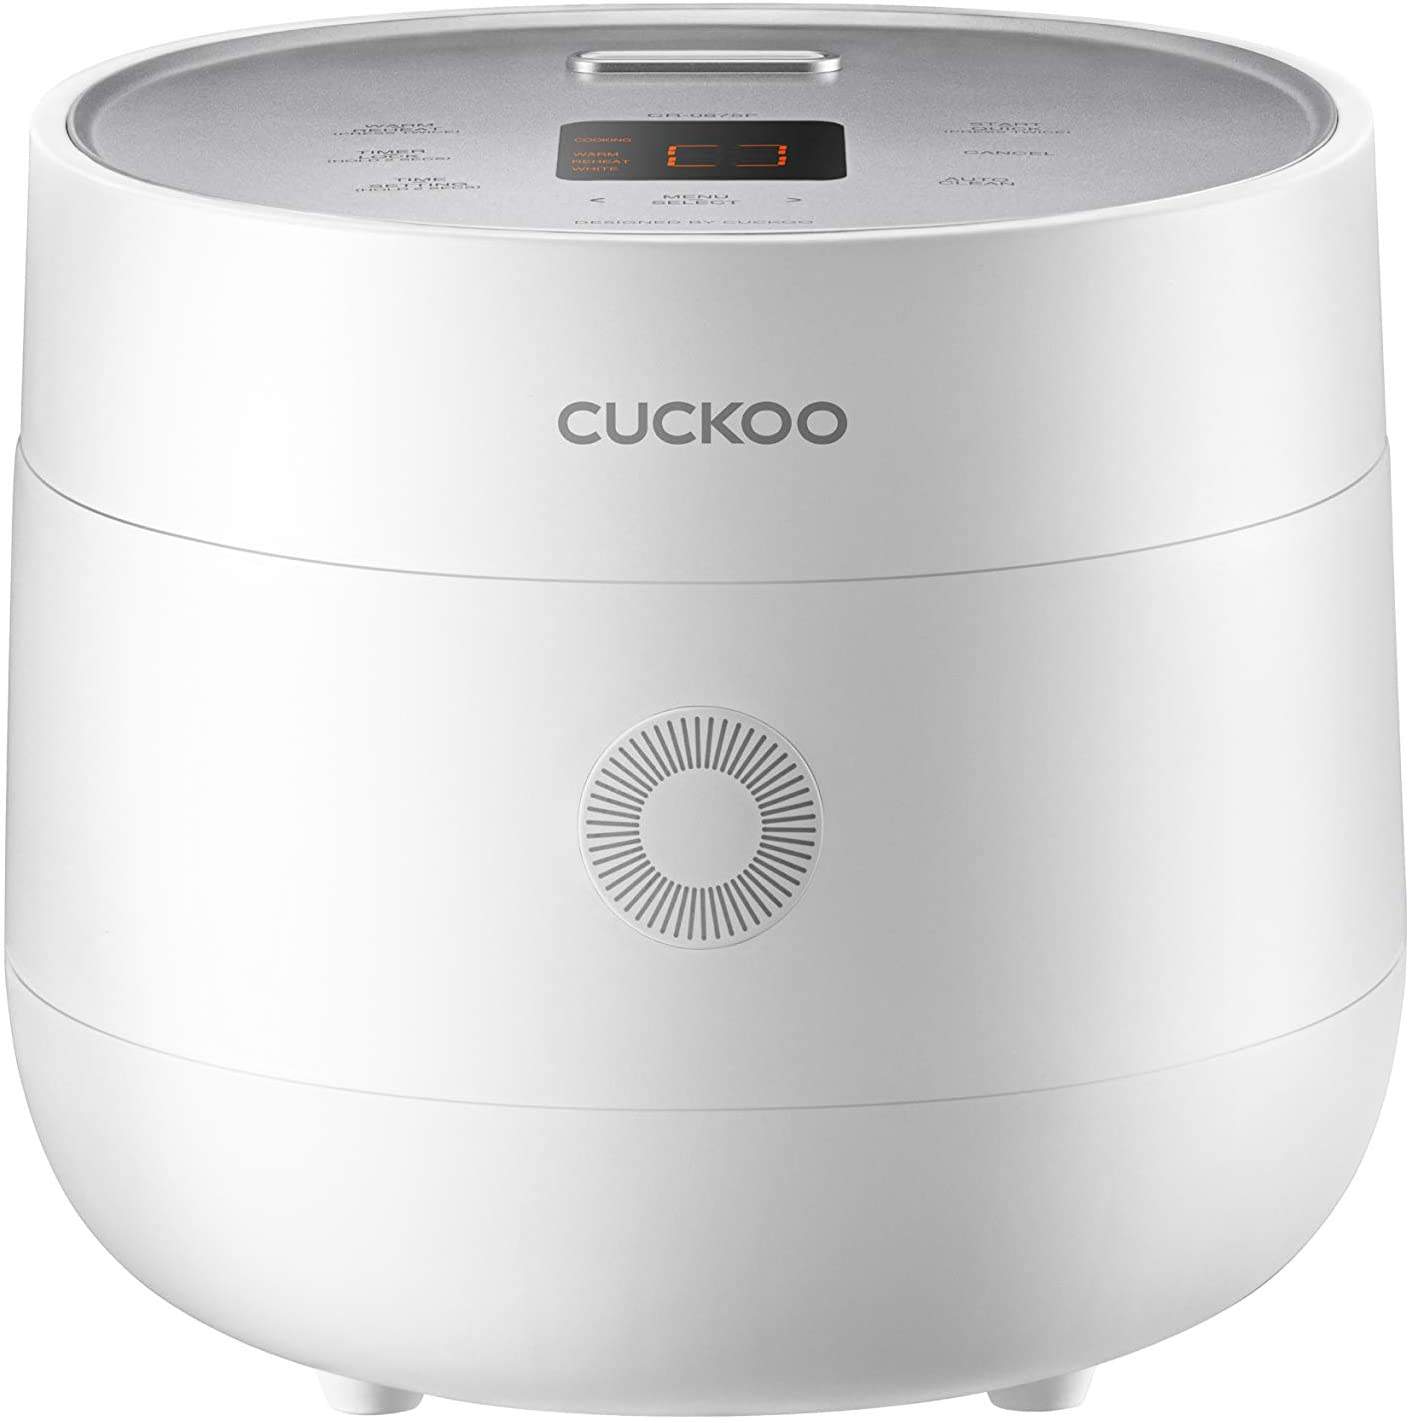 Best touch-screen rice cooker for basmati: CUCKOO CR-0675F 6-Cup Micom